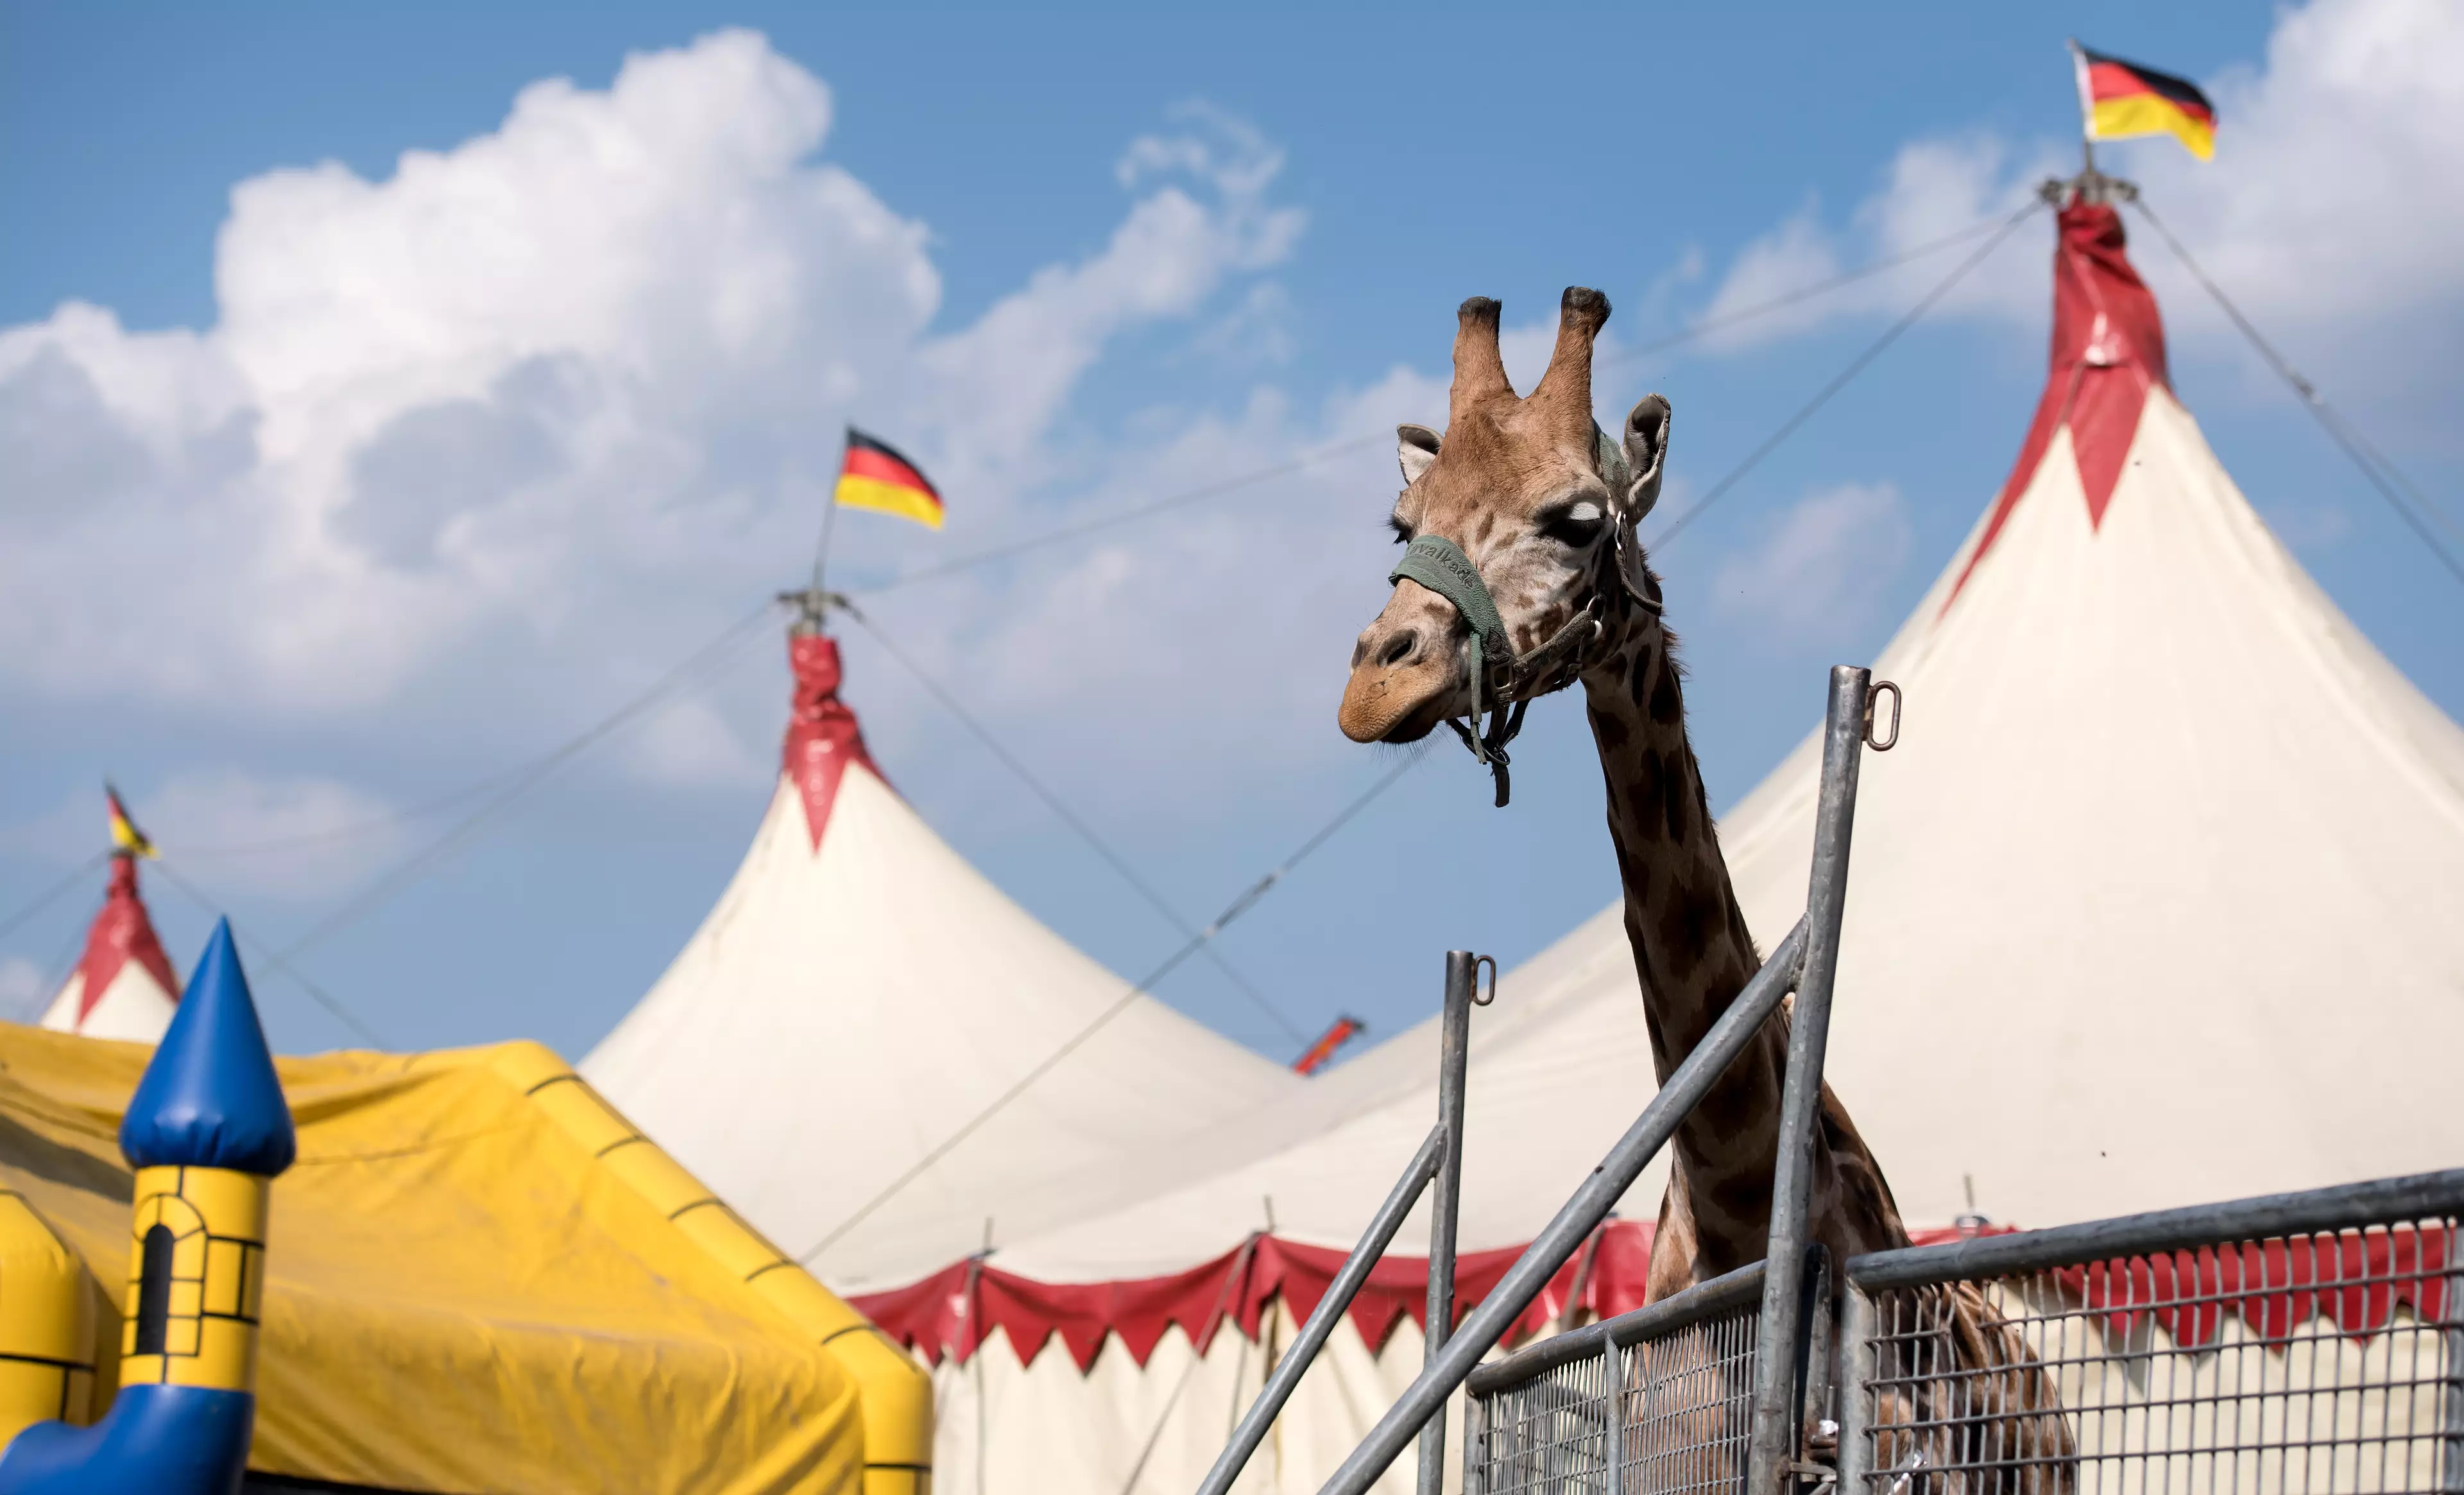 A Giraffe stands in its enclosure at the Circus Voyage in Munich, Germany.